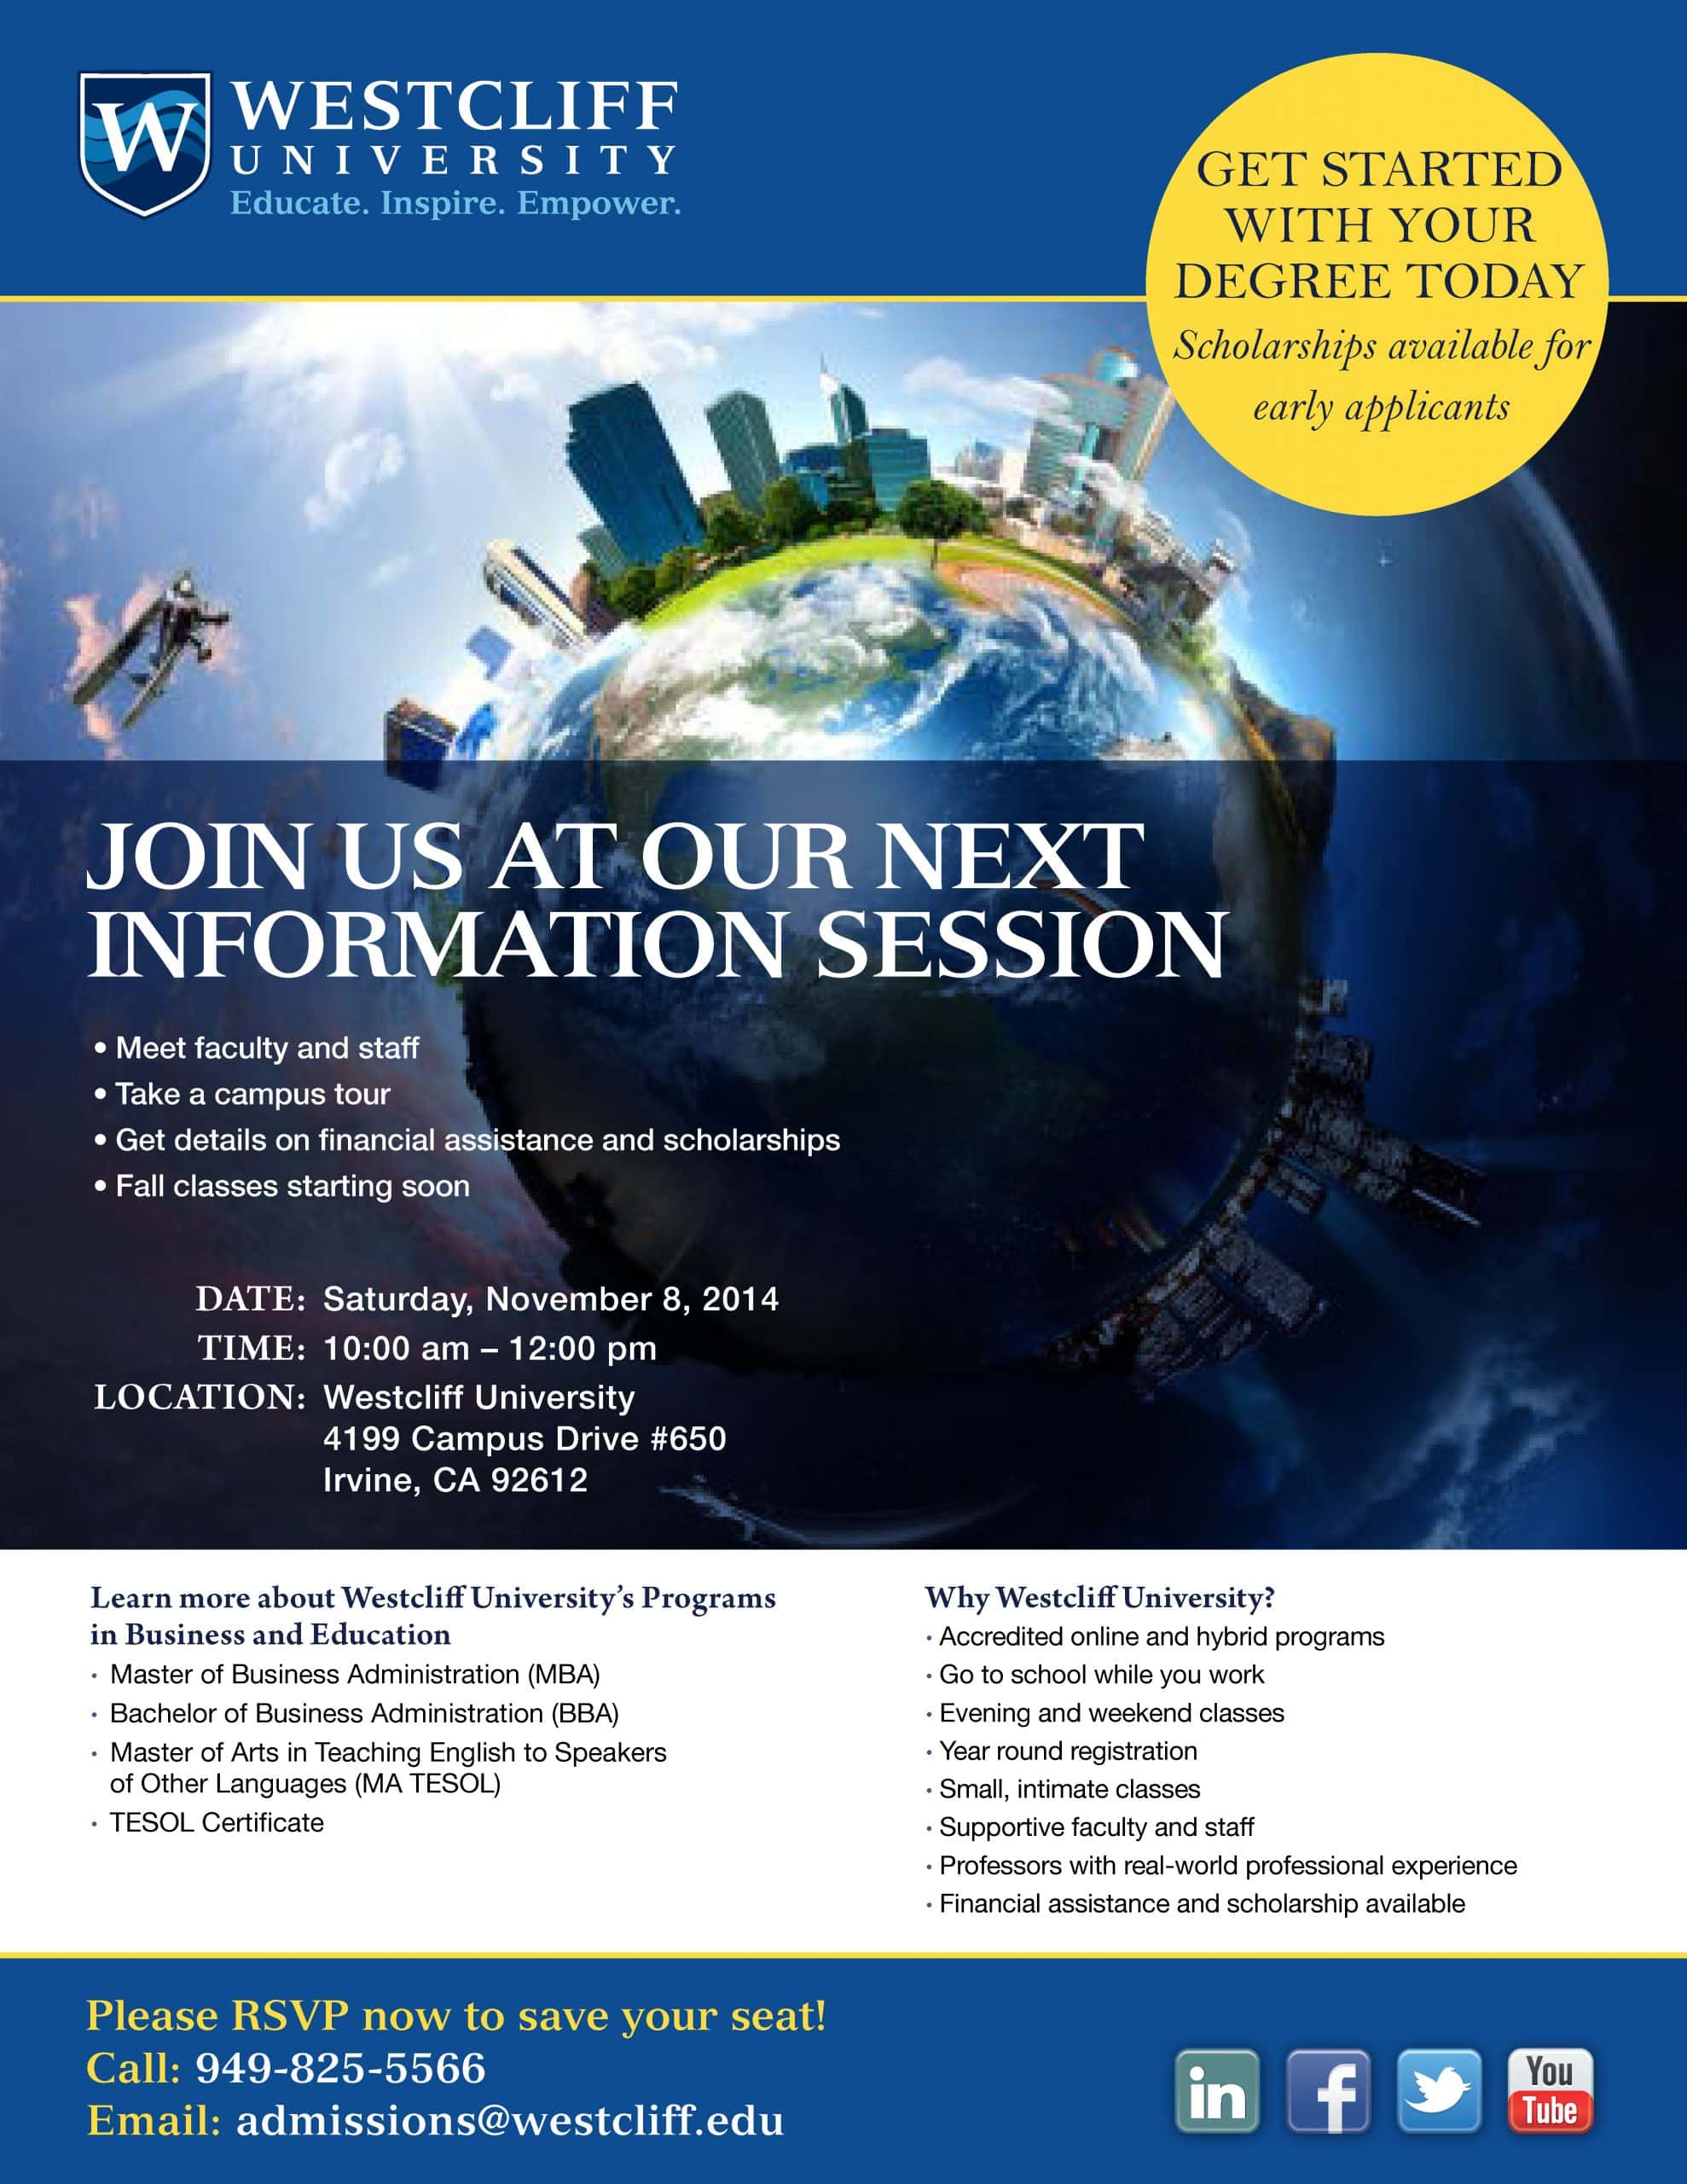 Information Session on Saturday, 11/08/14 10AM-12PM